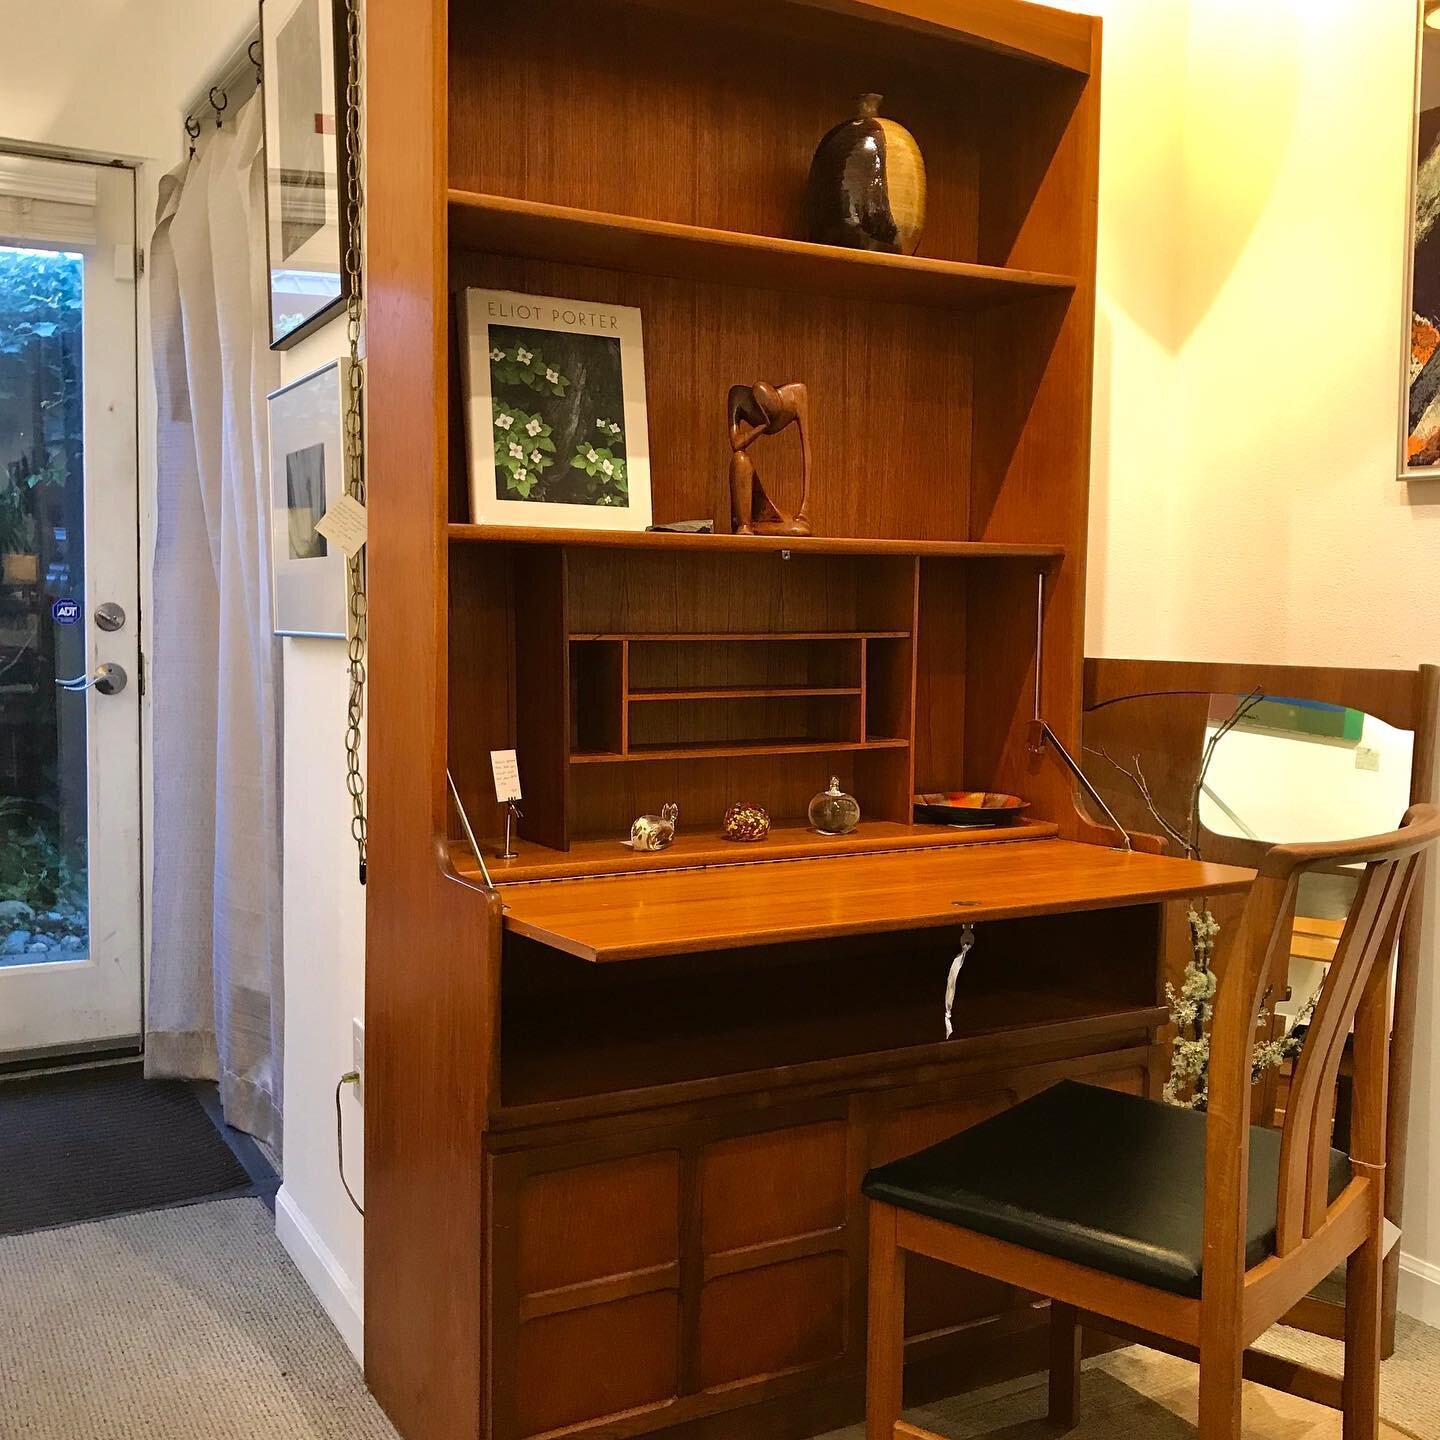 Do you NEED🥴 
your very own compact work space?! A private &ldquo;room&rdquo; of your own&mdash; a discrete, beautiful and organized retreat?! 😃
We may have the very thing for you or your Sweetie&mdash; 
your/their heart&rsquo;s desire...❤️

1970&r